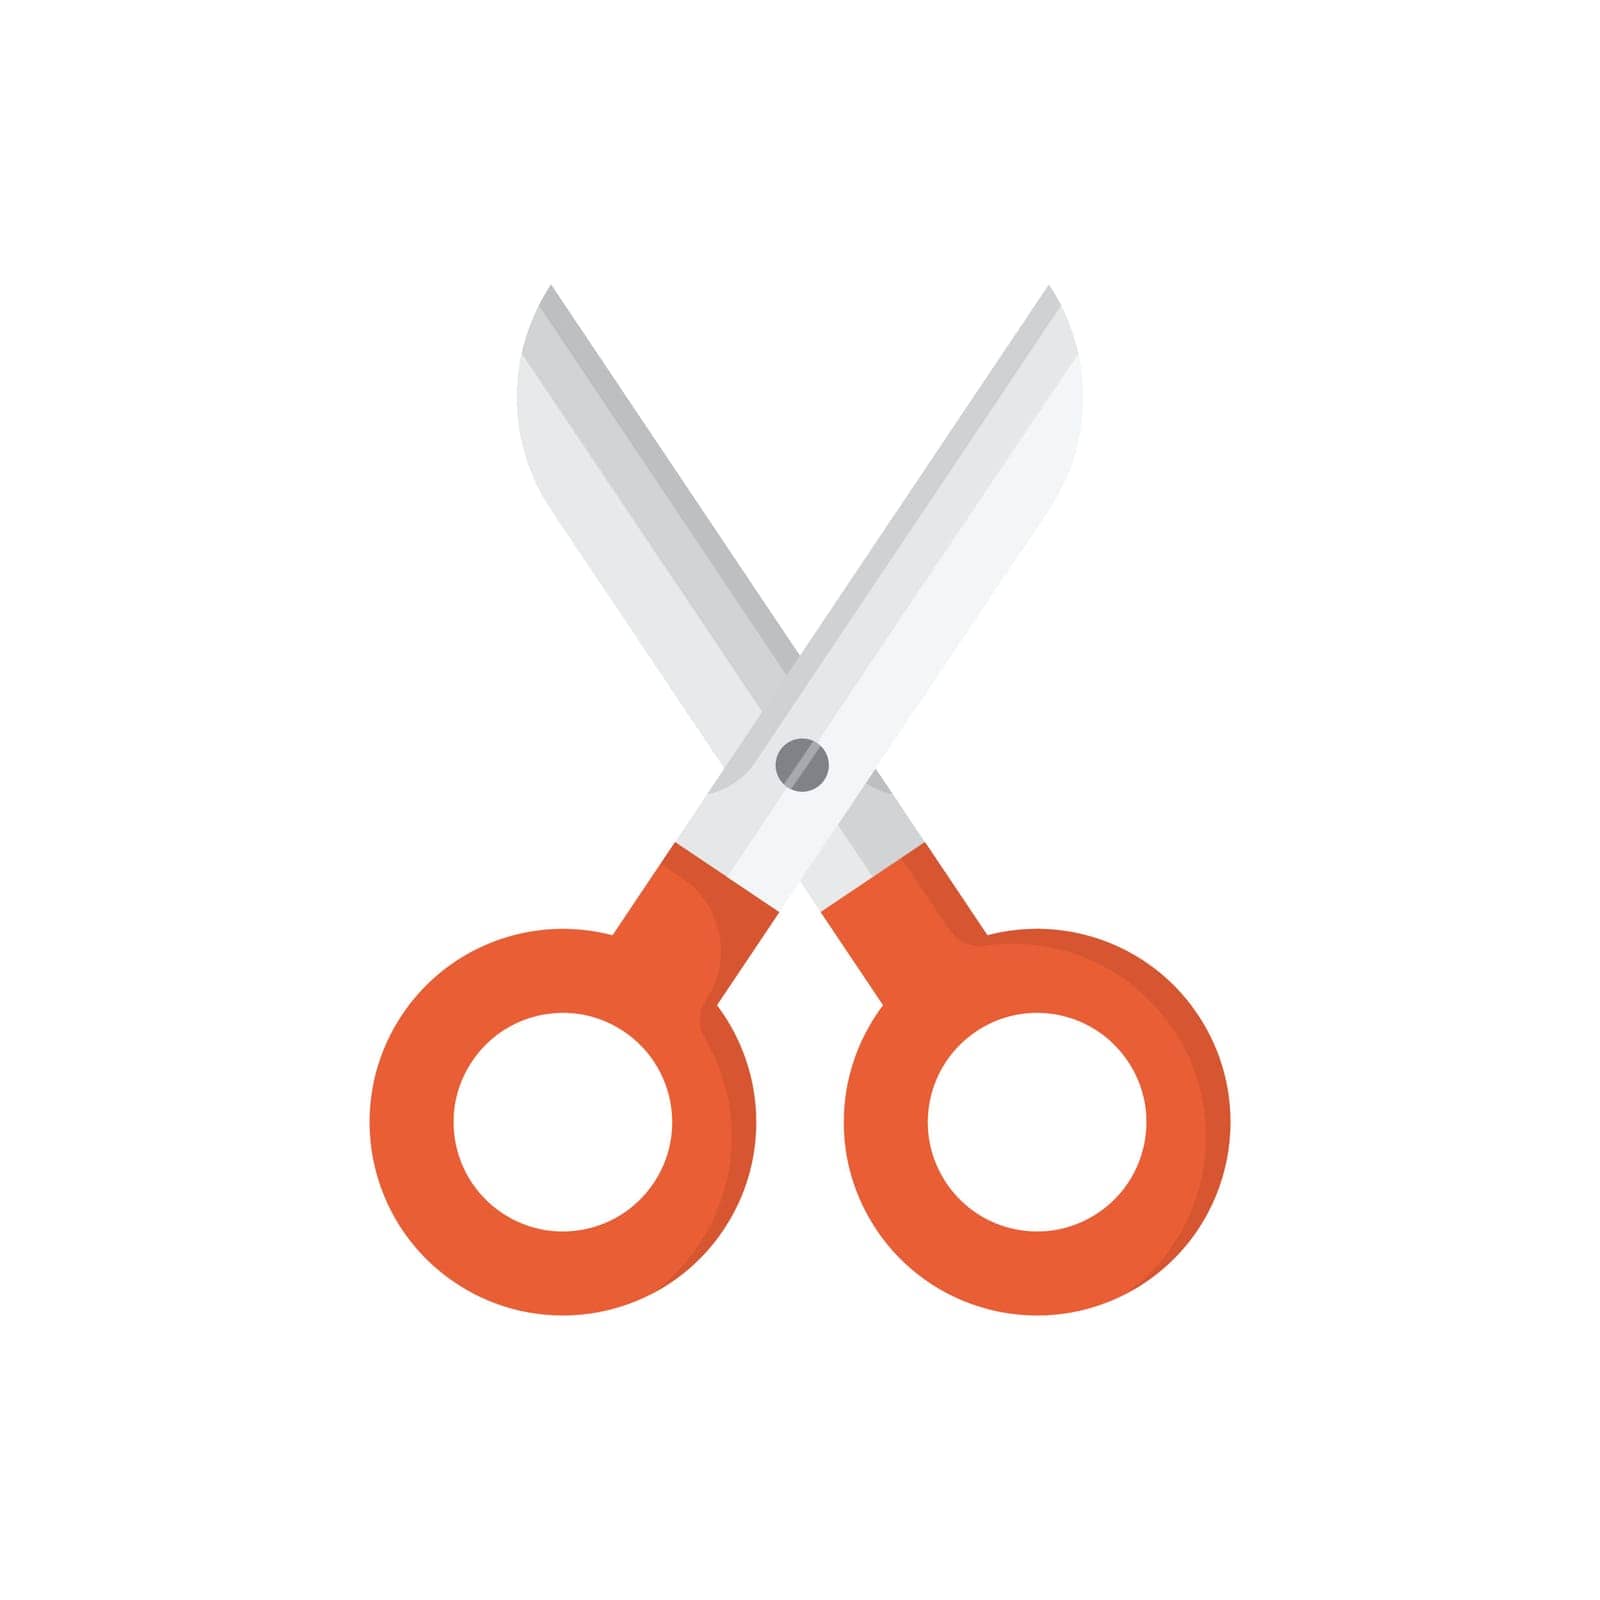 Scissor icon in flat style. Cutting hair equipment vector illustration on isolated background. Hairdressing sign business concept. by LysenkoA